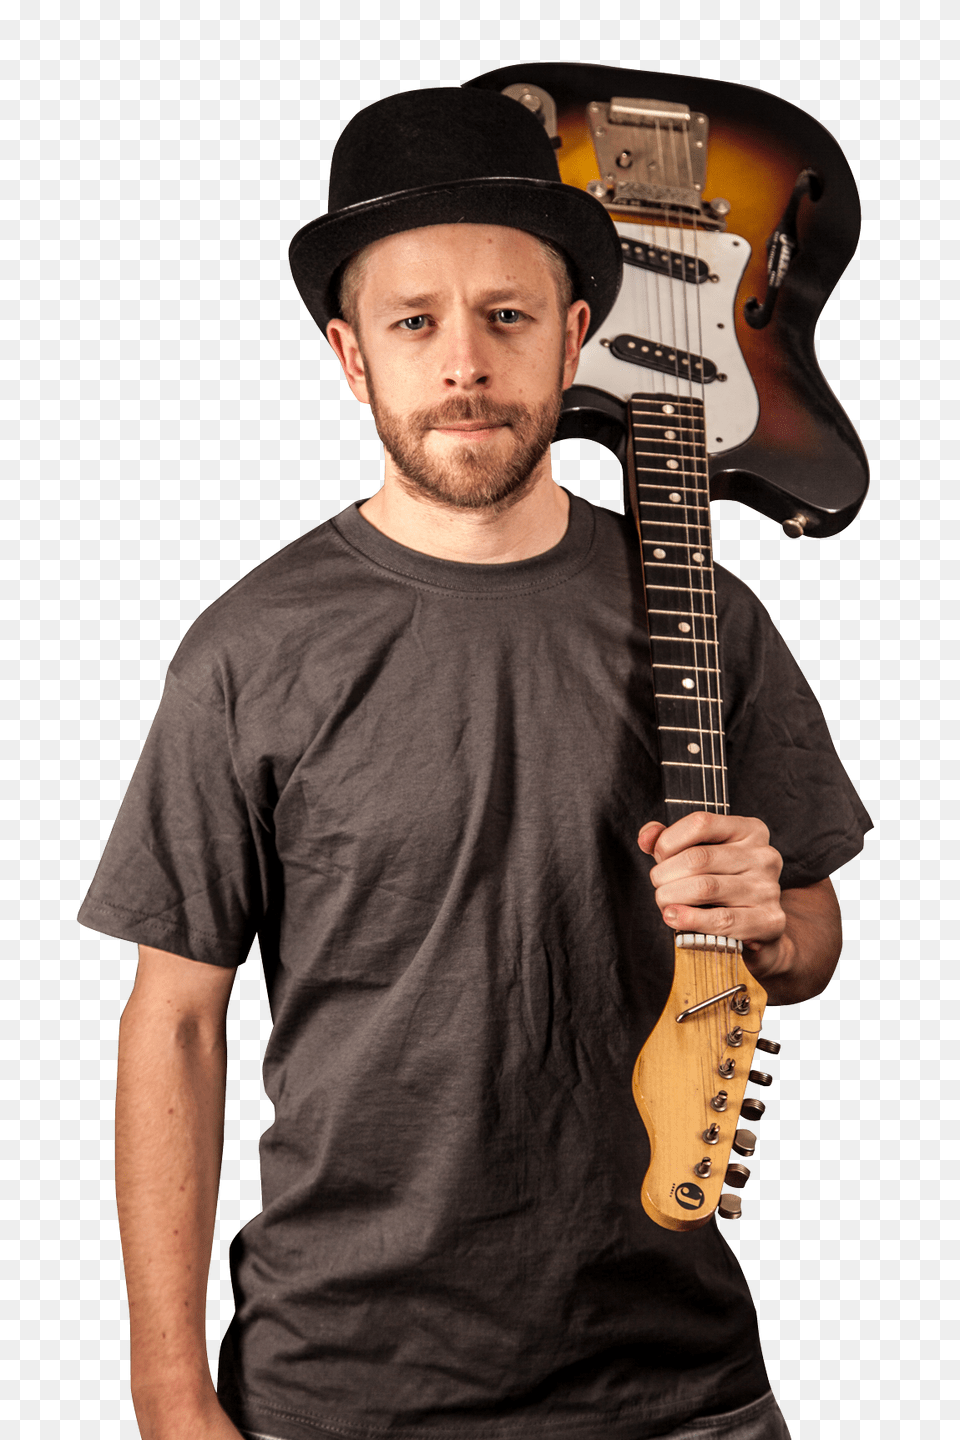 Pngpix Com Guitarist Stand And Holds A Guitar Image, Musical Instrument, Adult, Man, Male Png